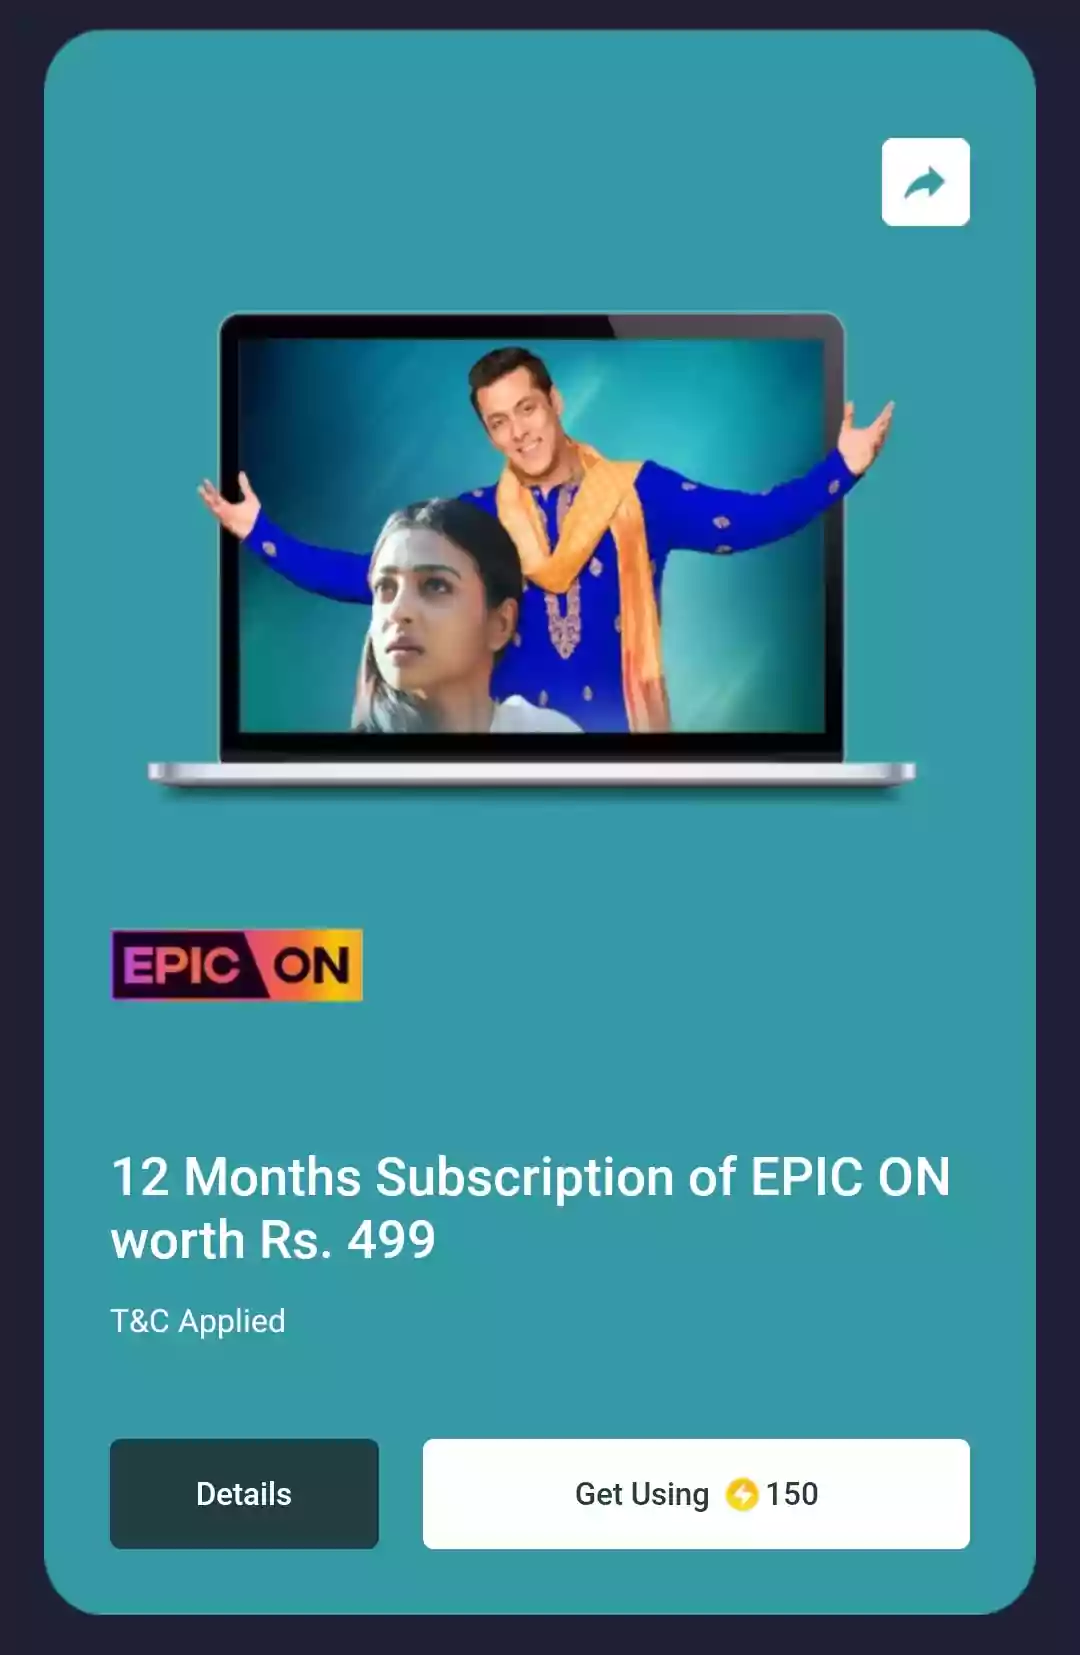 FREE EPIC ON Subscriptions 12 Month Of Worth ₹499 To Use Flipkart SuperCoin 150